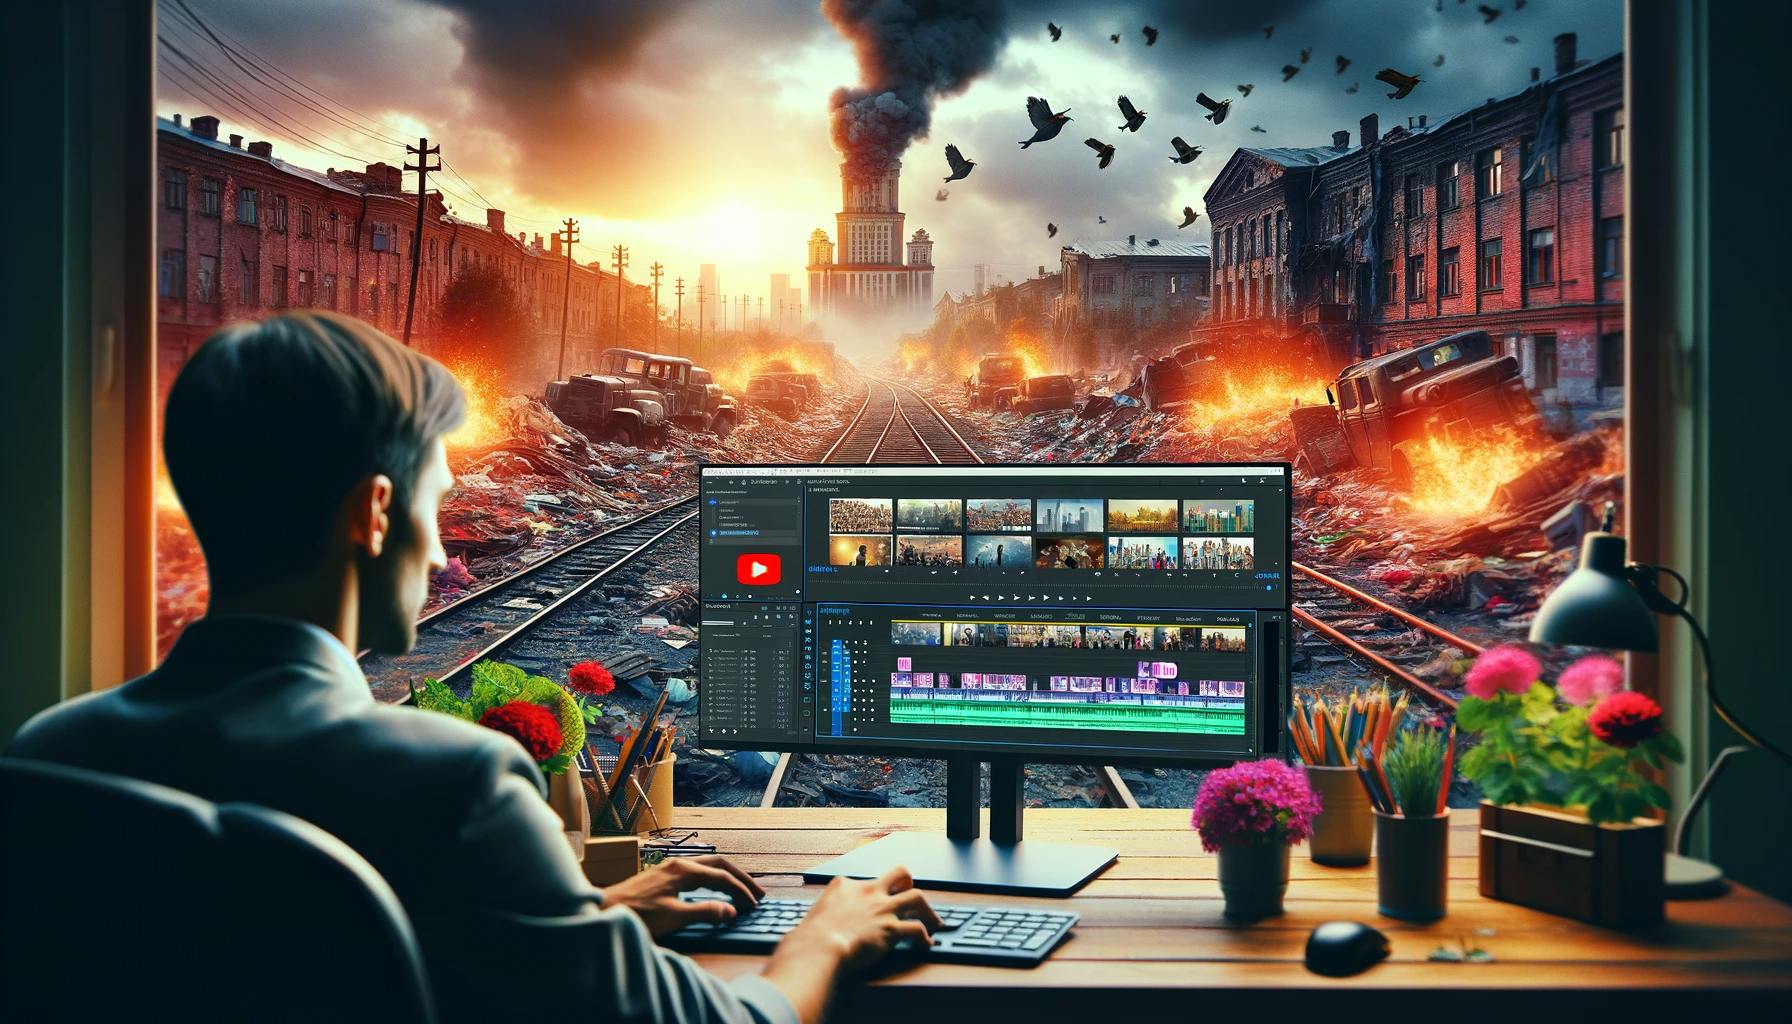 a man sits at a desk with video editing software on the screen. Out the picture window in front of him is a war scene with bombs, birds, explosions, and railroad tracks.